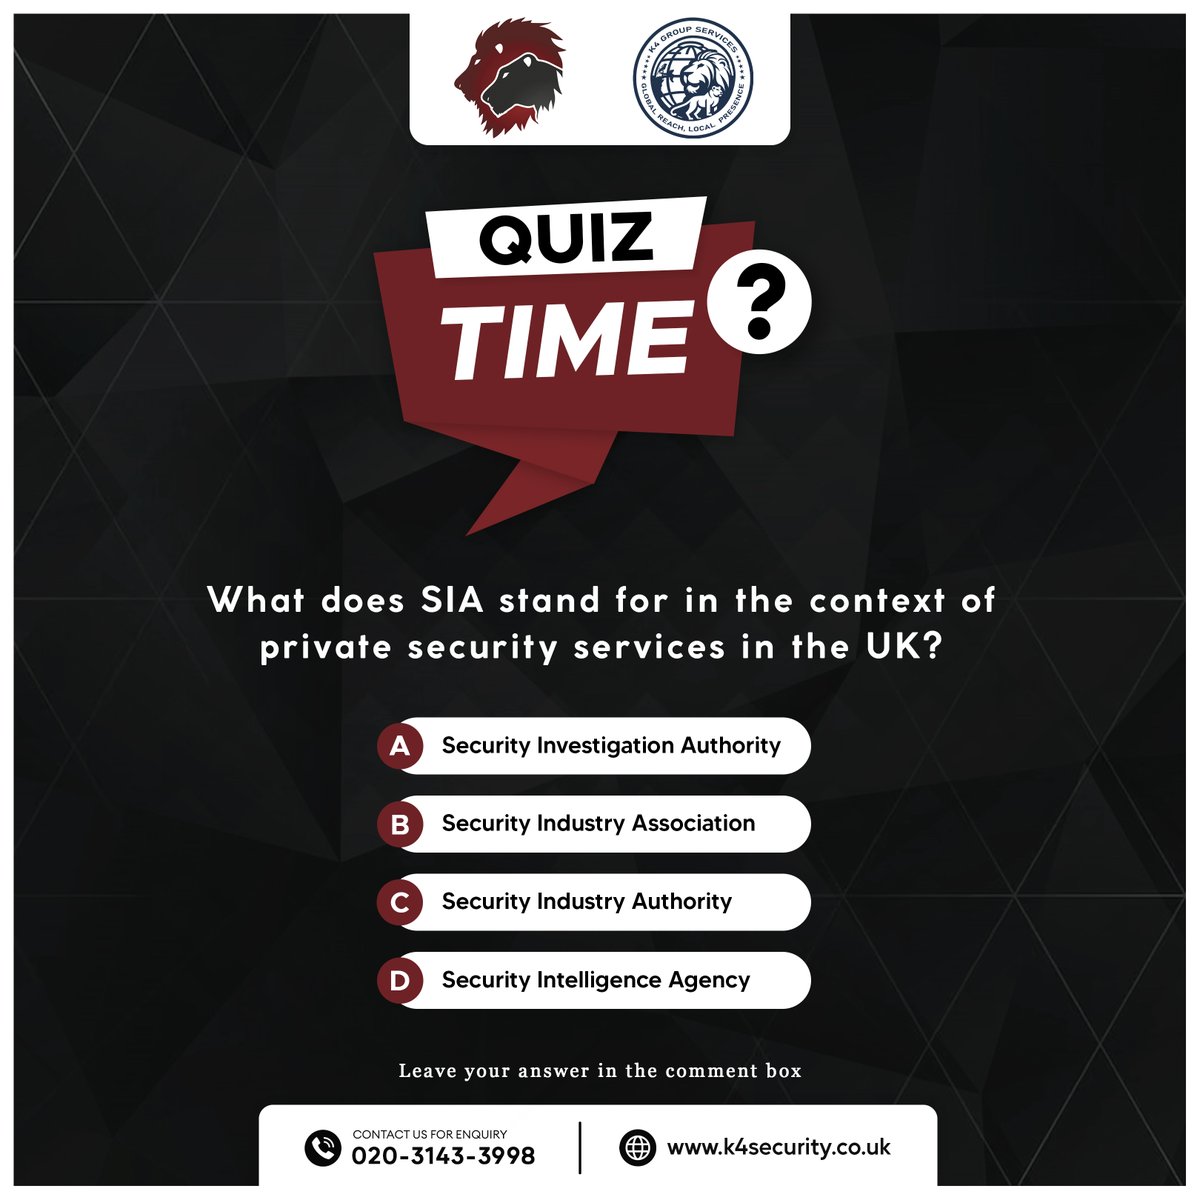 Think you've got an eye for security detail? Take our quiz and see if you can spot the gaps!

#securityawareness #securityindustry #securityguard #securityprofessional #securitysolutions #securityquiz #testyourknowledge #UKsecurity #staysafe